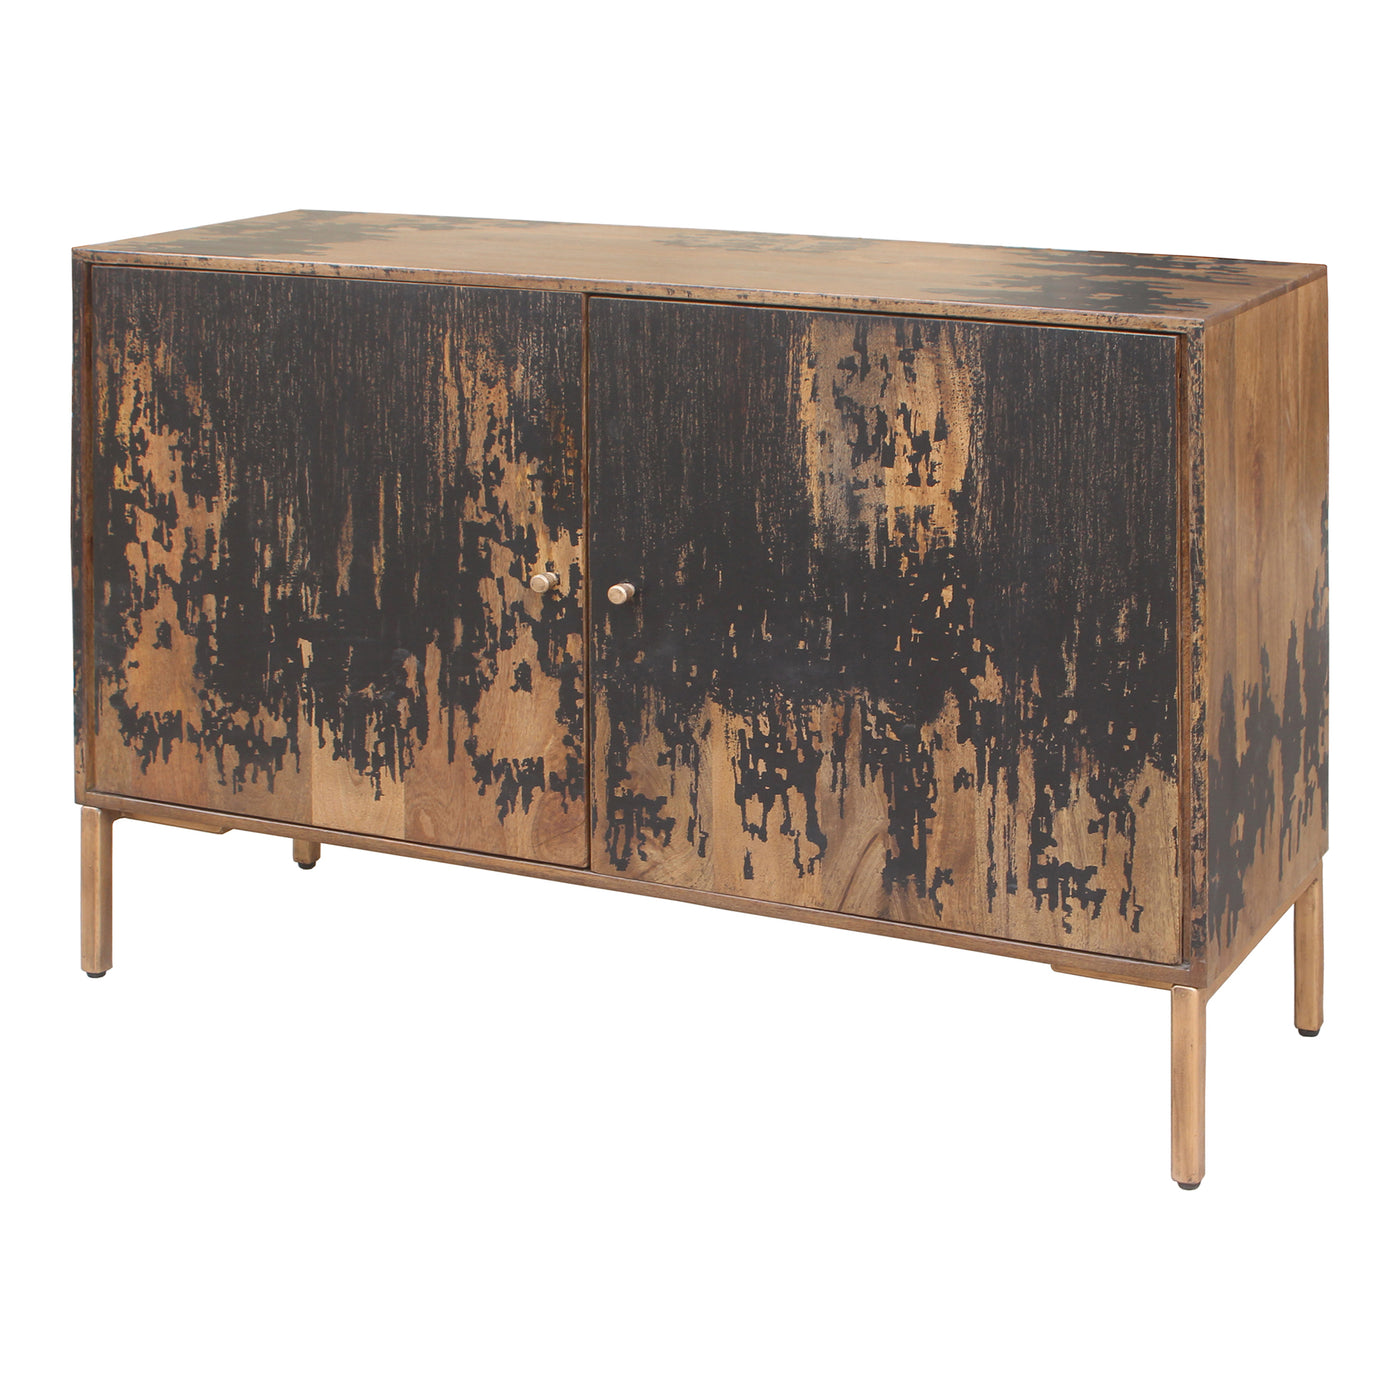 The Artists Sideboard is filled with history and charm on the outside. On the inside, it contains two spacious shelves to ...